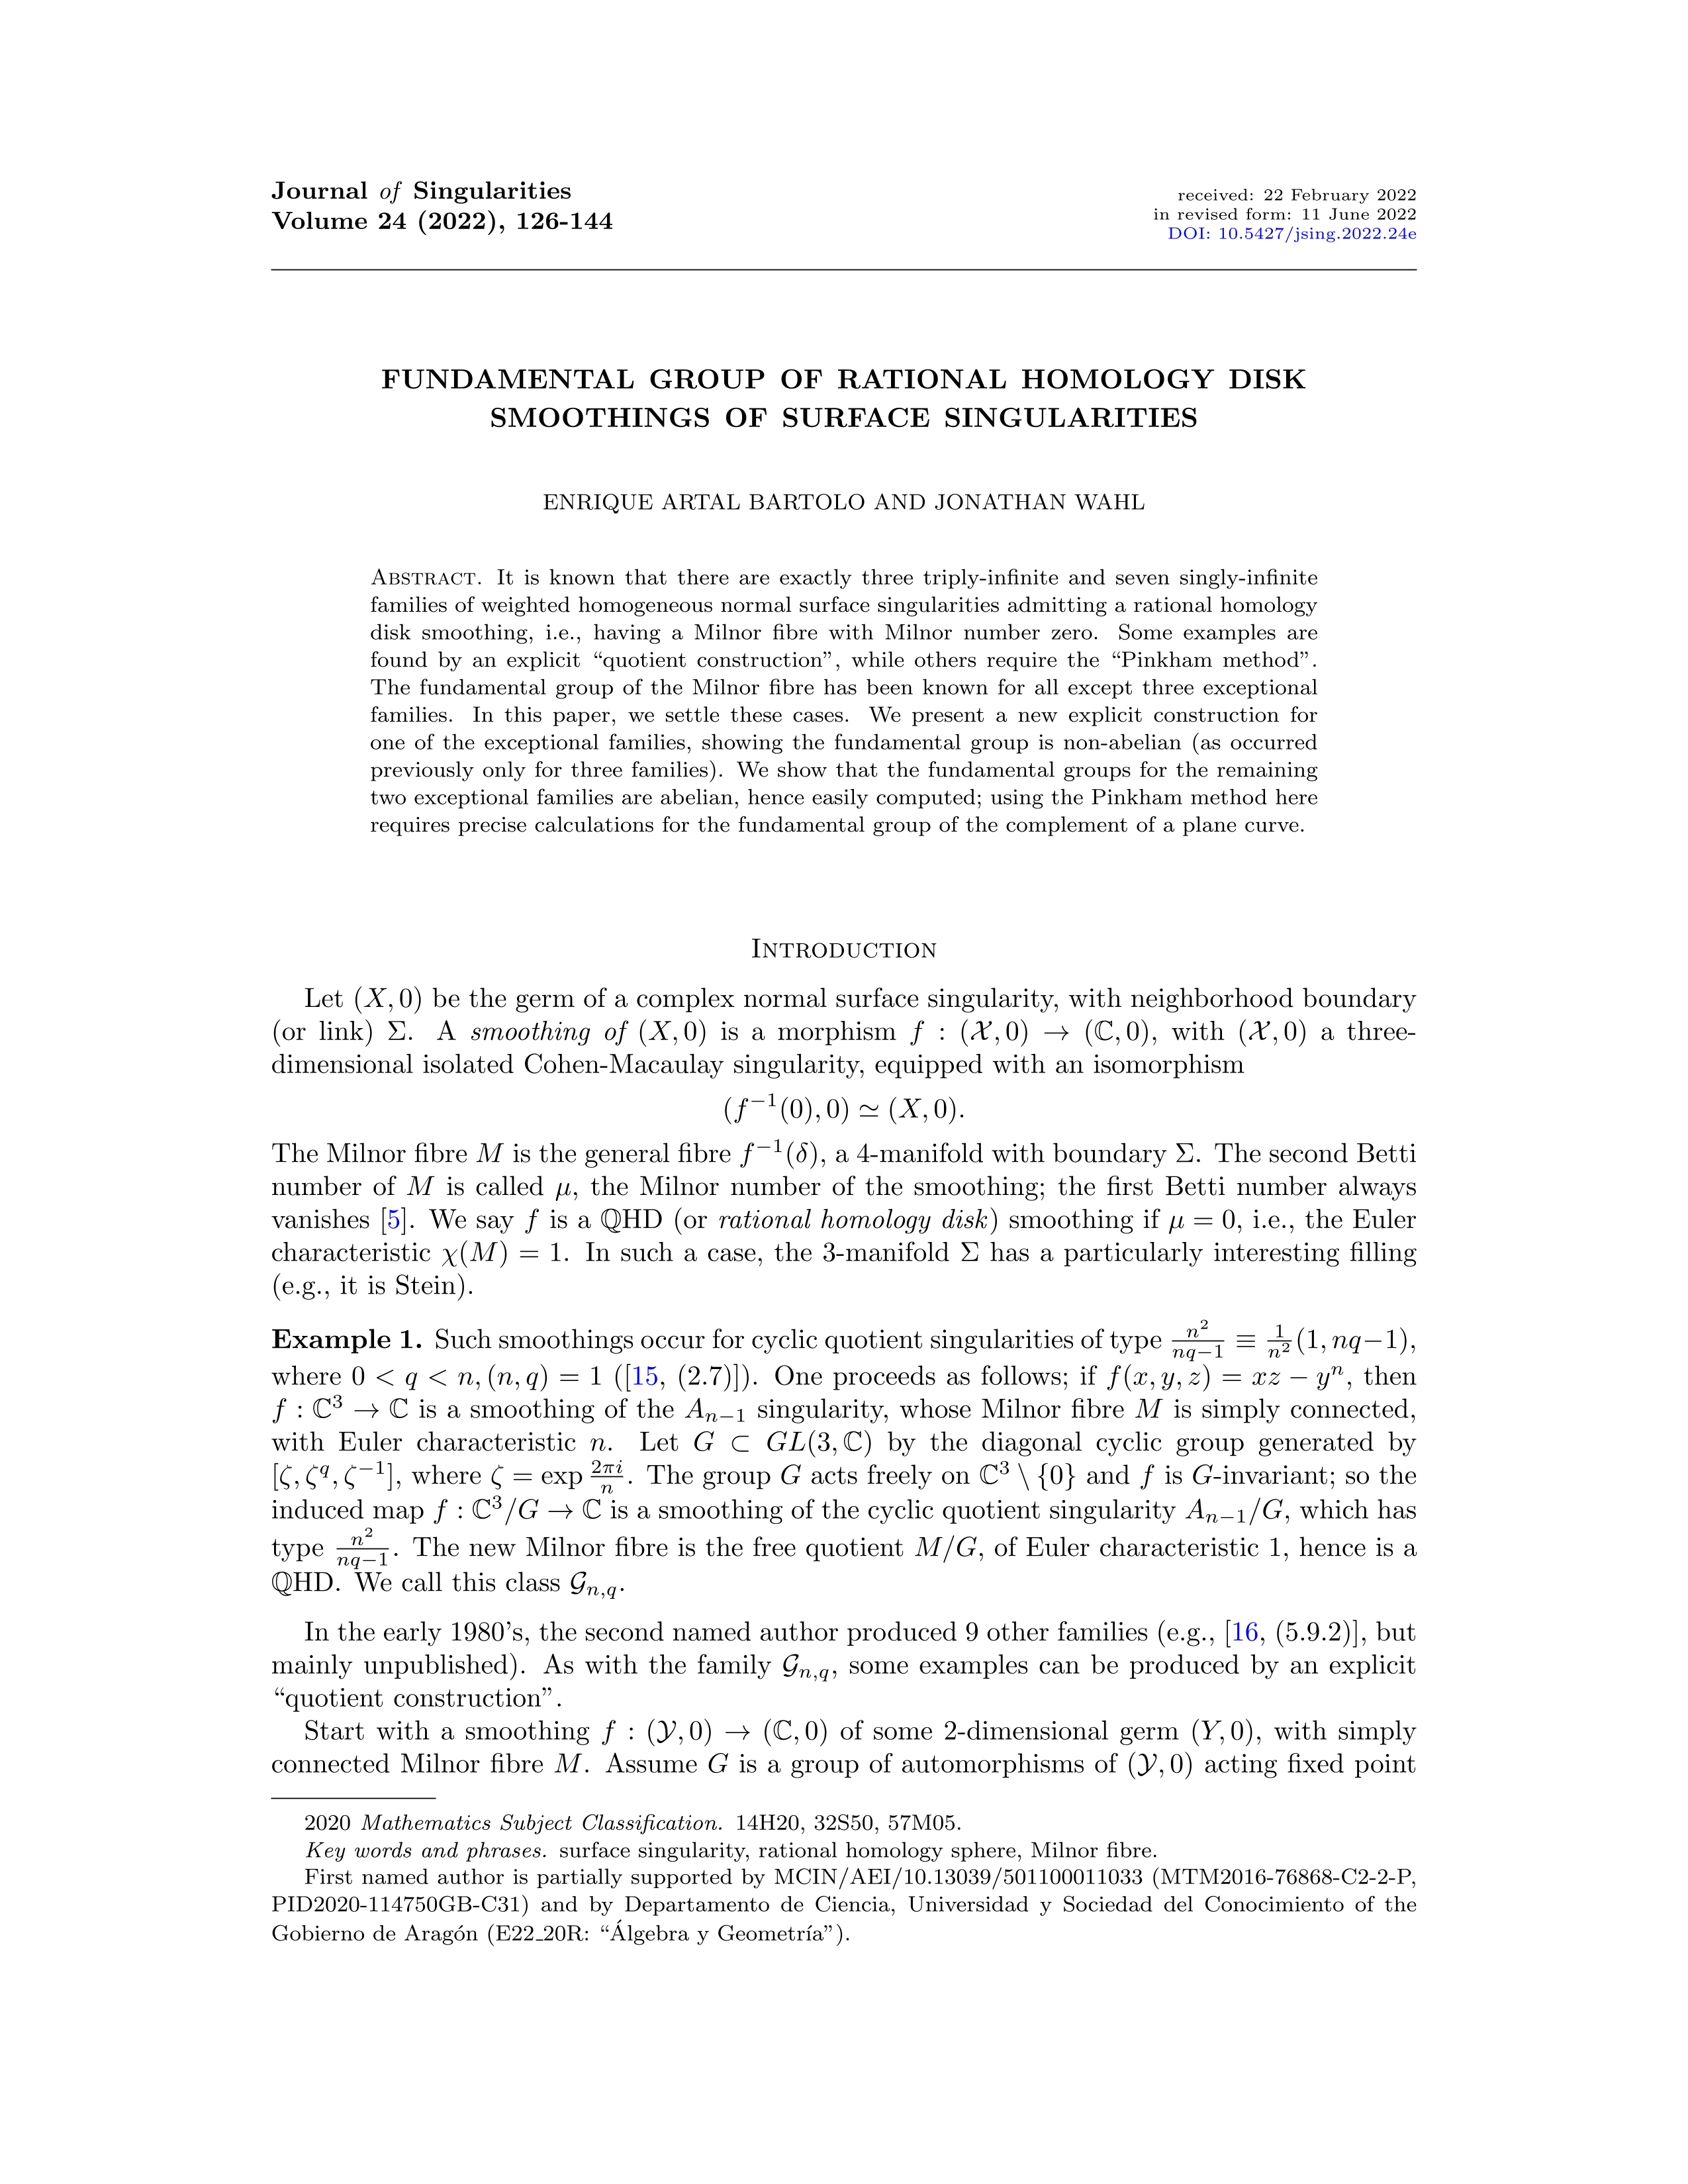 Fundamental Group of Rational Homology Disk Smoothings of Surface Singularities